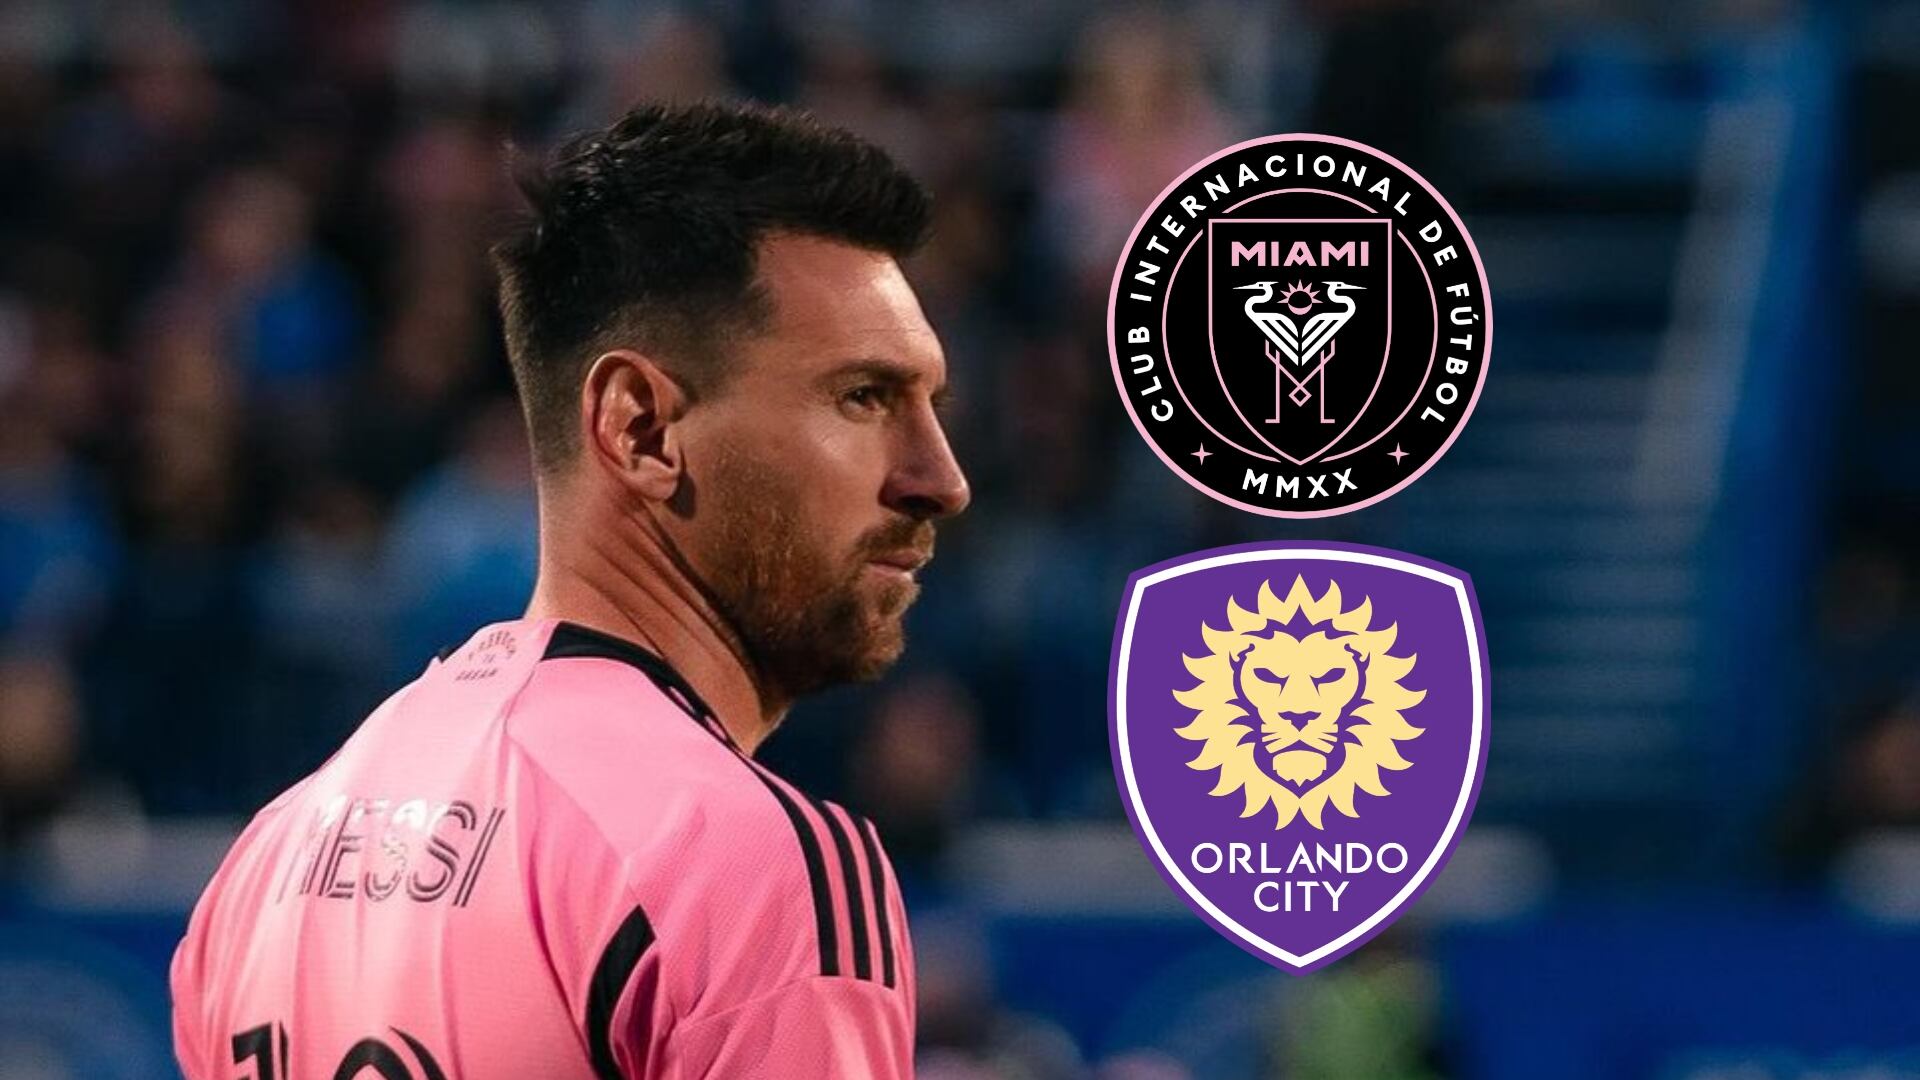 The worst news for Messi and Inter Miami before a key game against Orland that worries the fans around the world